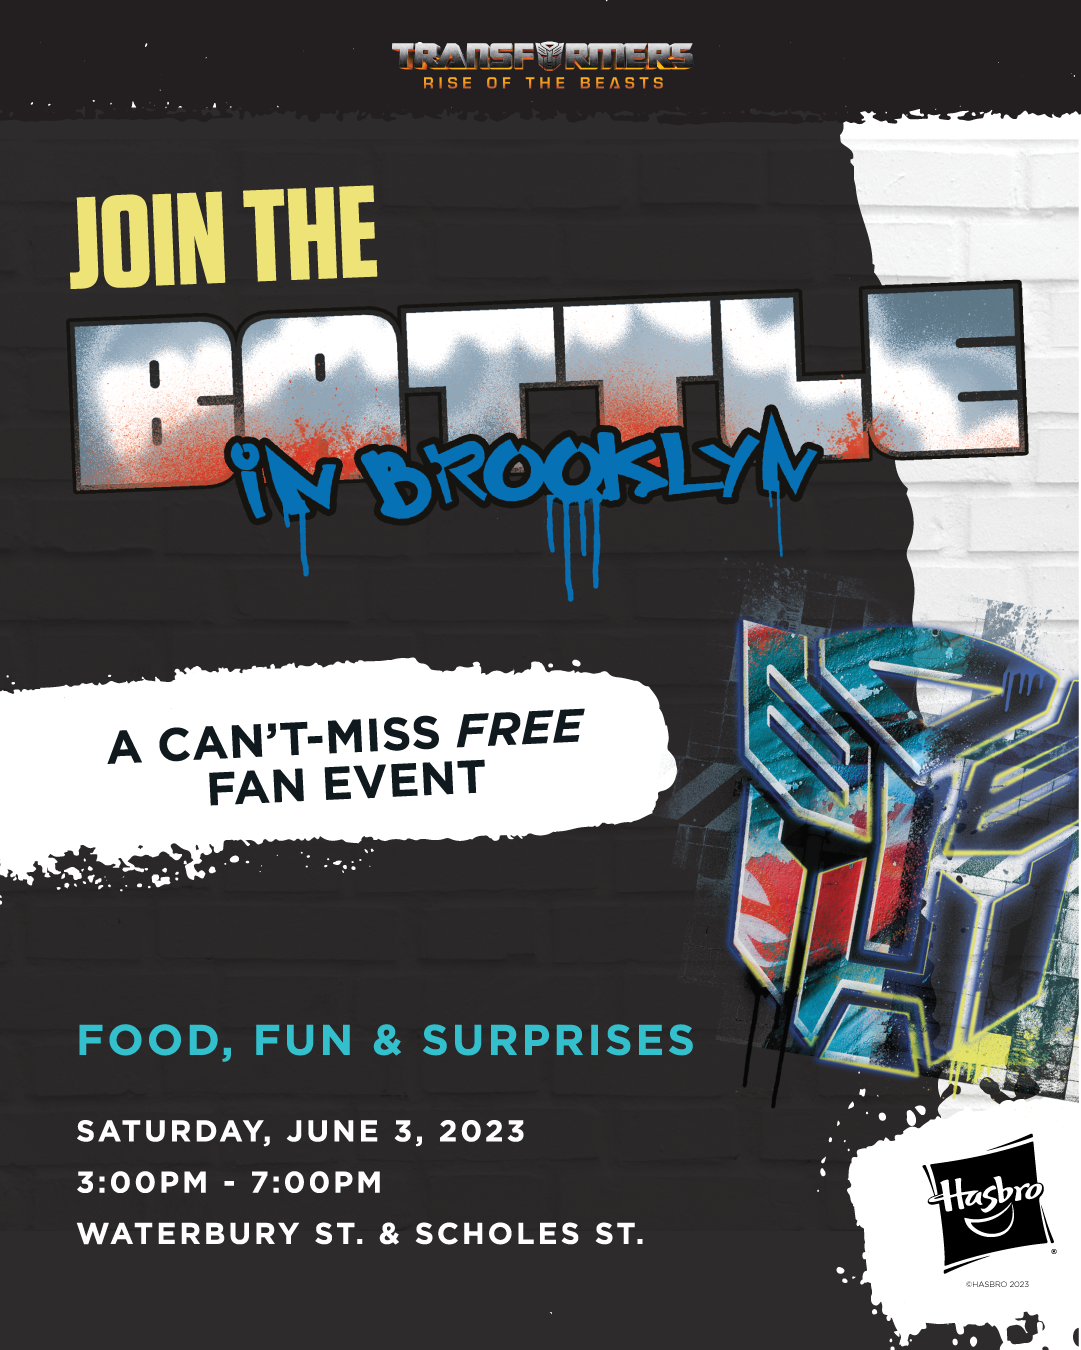 Details of Free Fan Event for Transformers Rise of the Beasts in Brooklyn